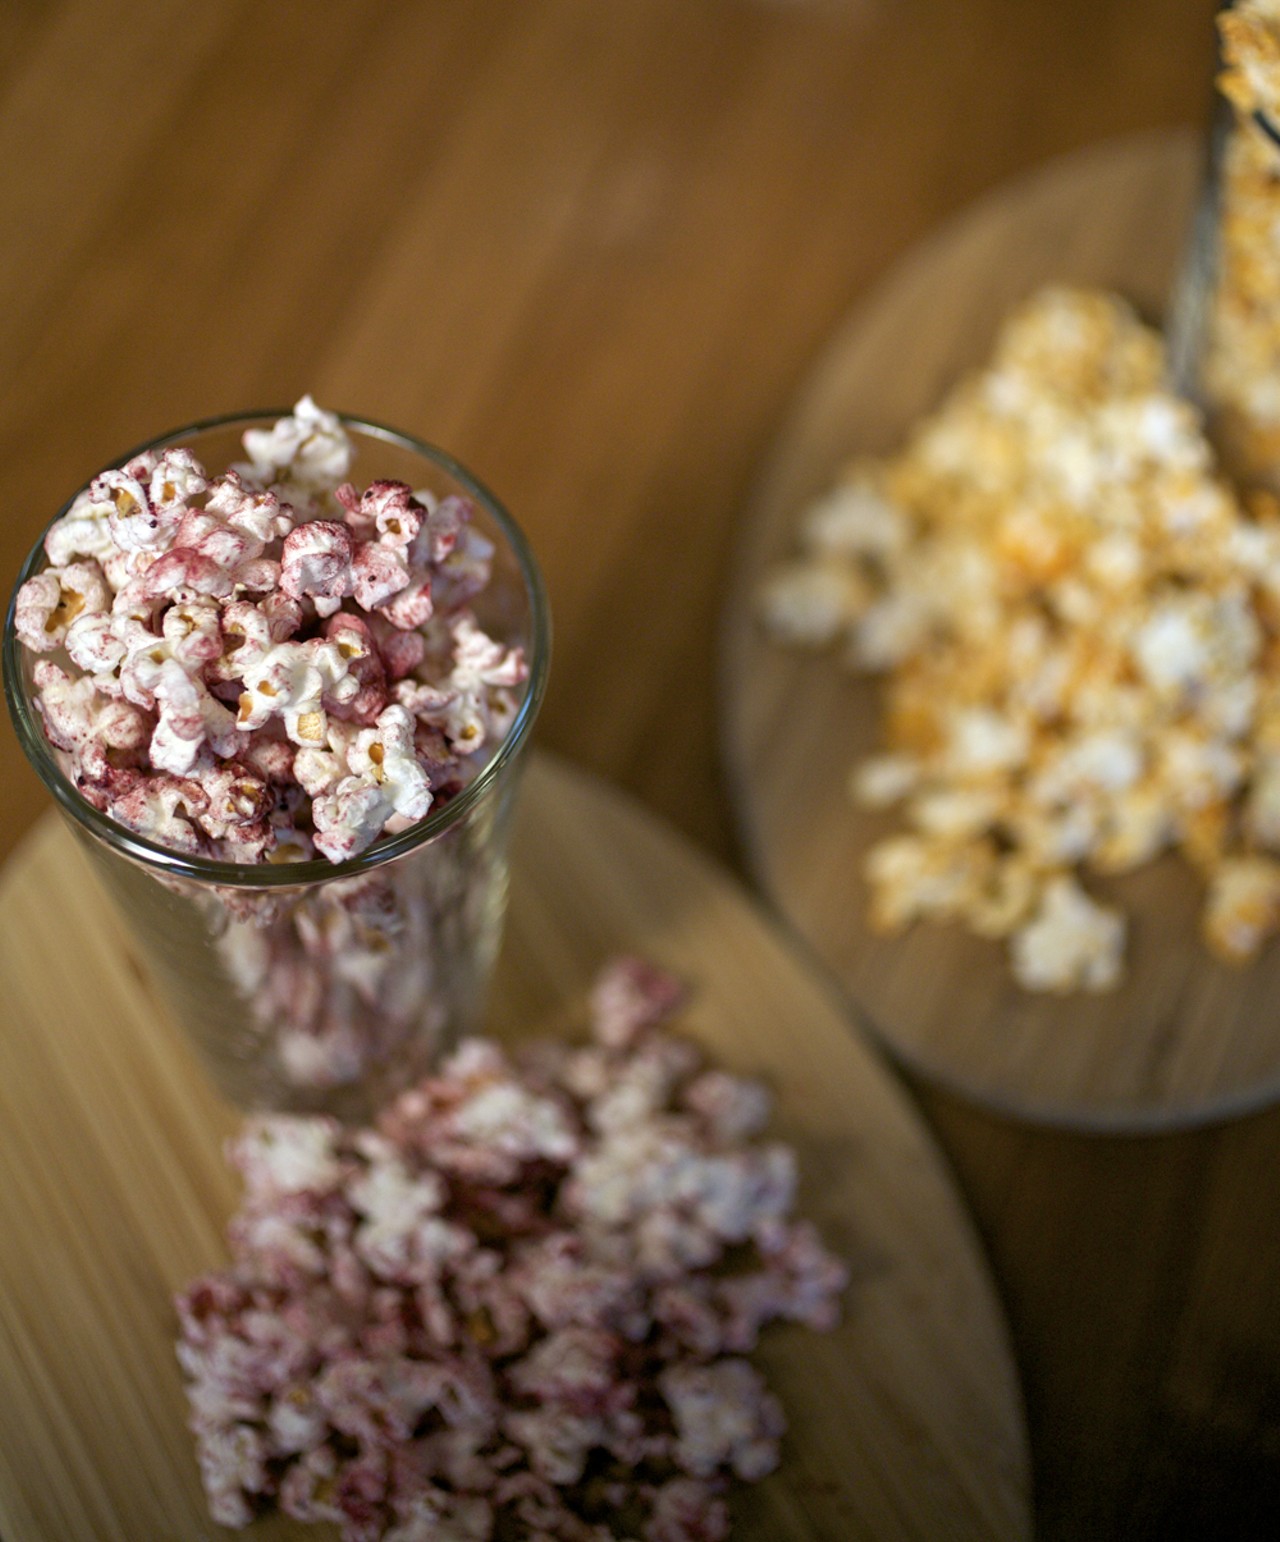 From the snack portion of the menu comes popcorn, shown here in two different varieties. First is the smoked Spanish paprika and sea salt. Then, the honey, beet powder and mustard flavored popcorn.